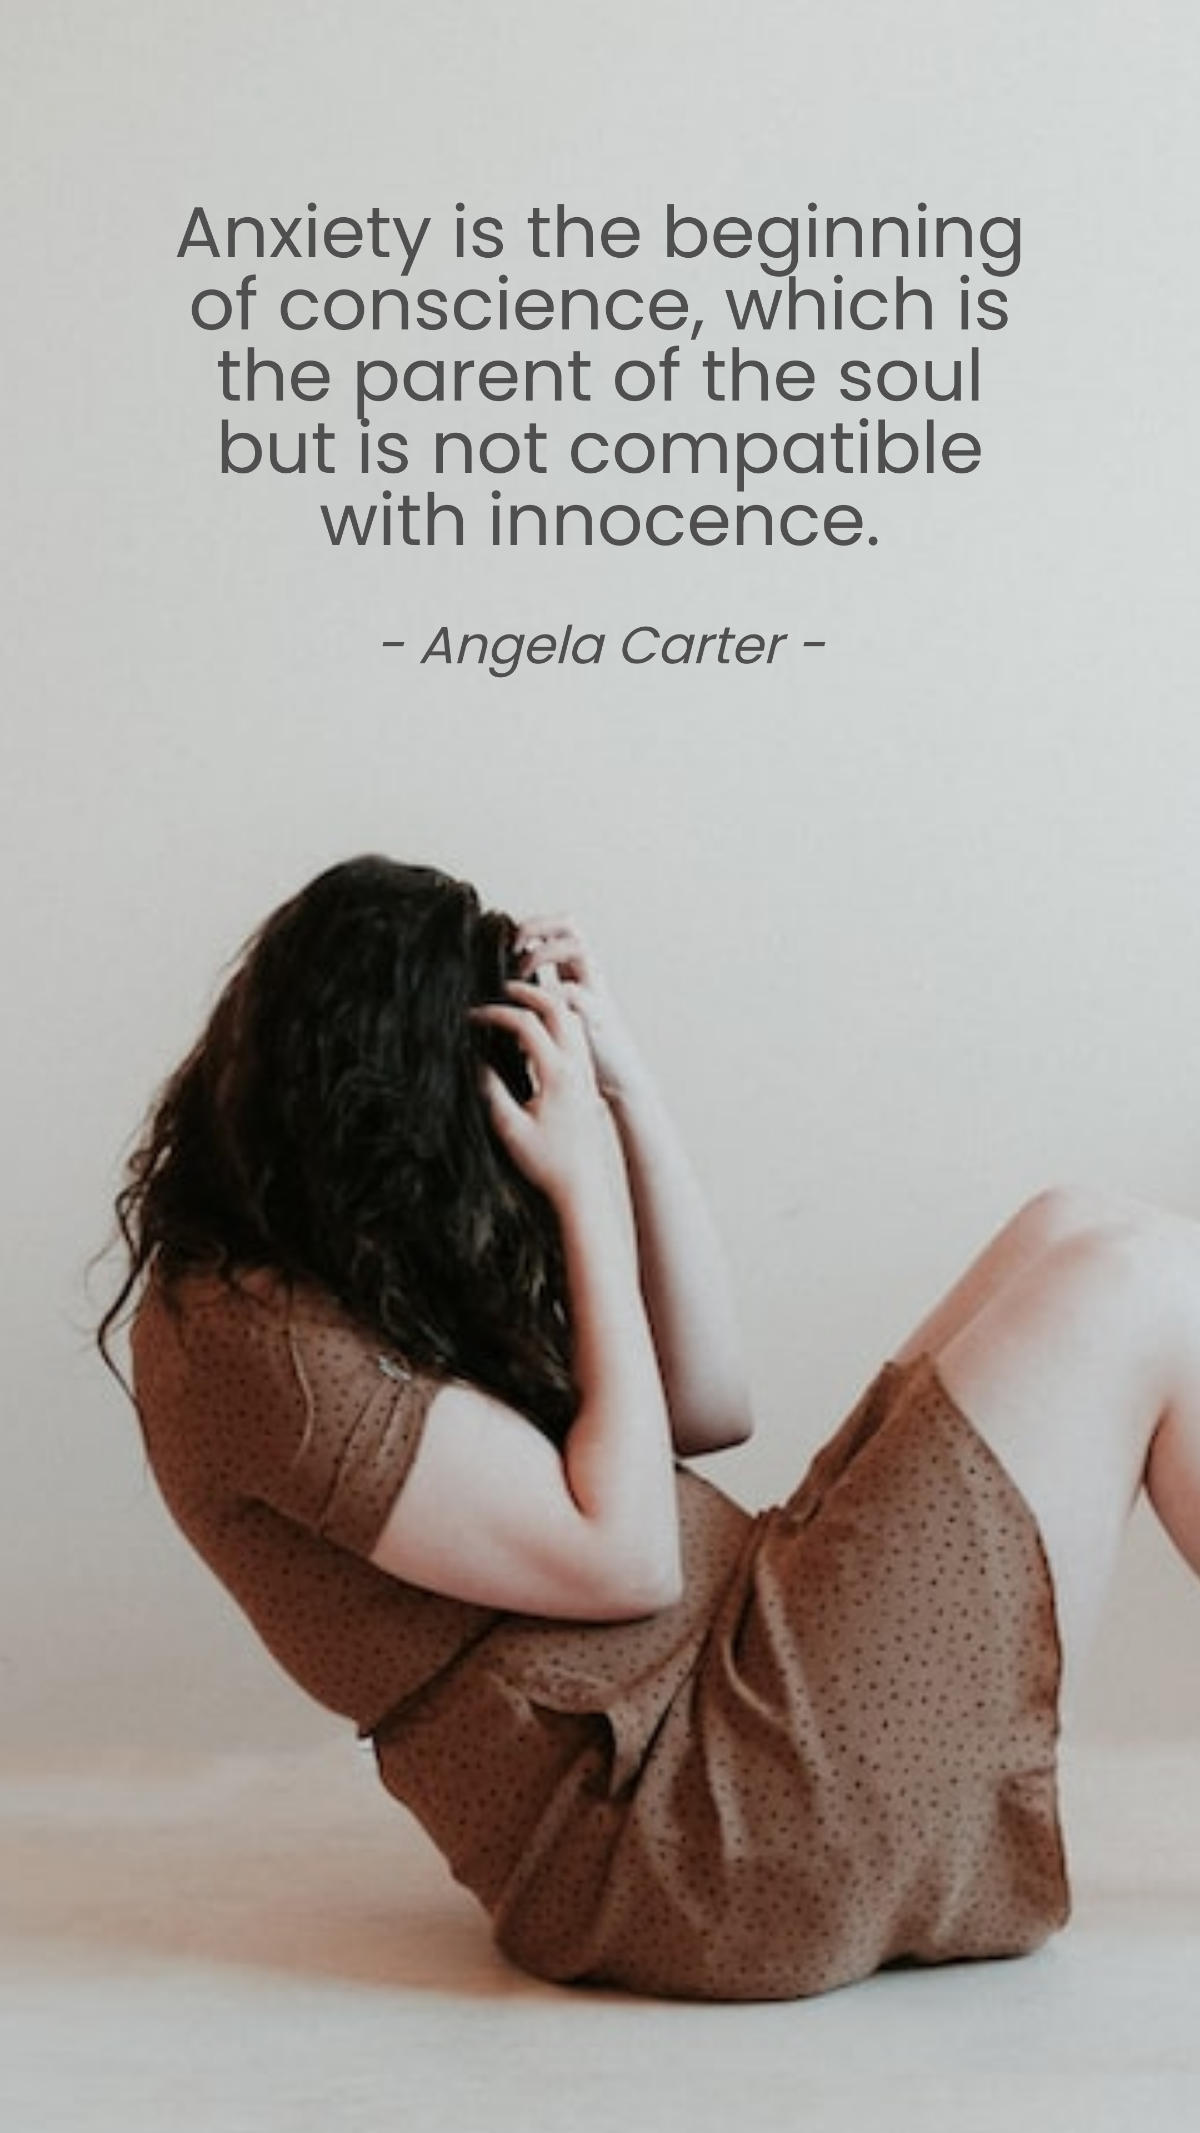 Angela Carter - Anxiety is the beginning of conscience, which is the parent of the soul but is not compatible with innocence.